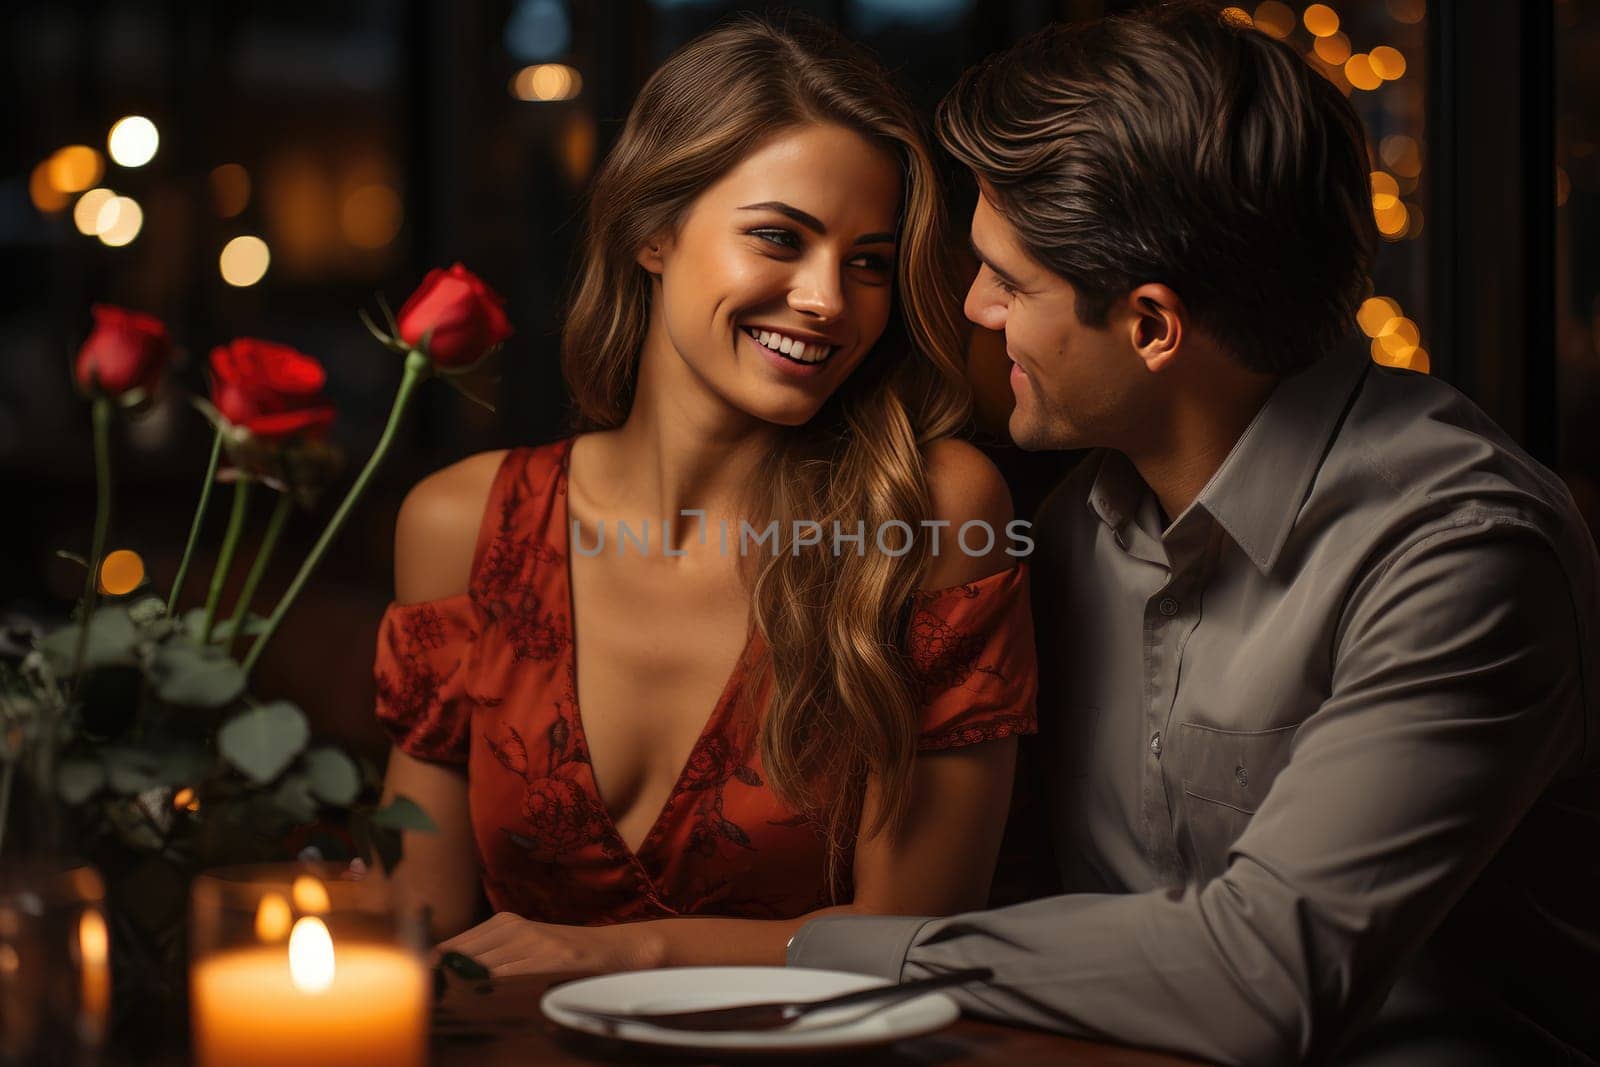 On the evening in honor of Valentine's Day, a woman creates magic by preparing a romantic dinner for her husband.